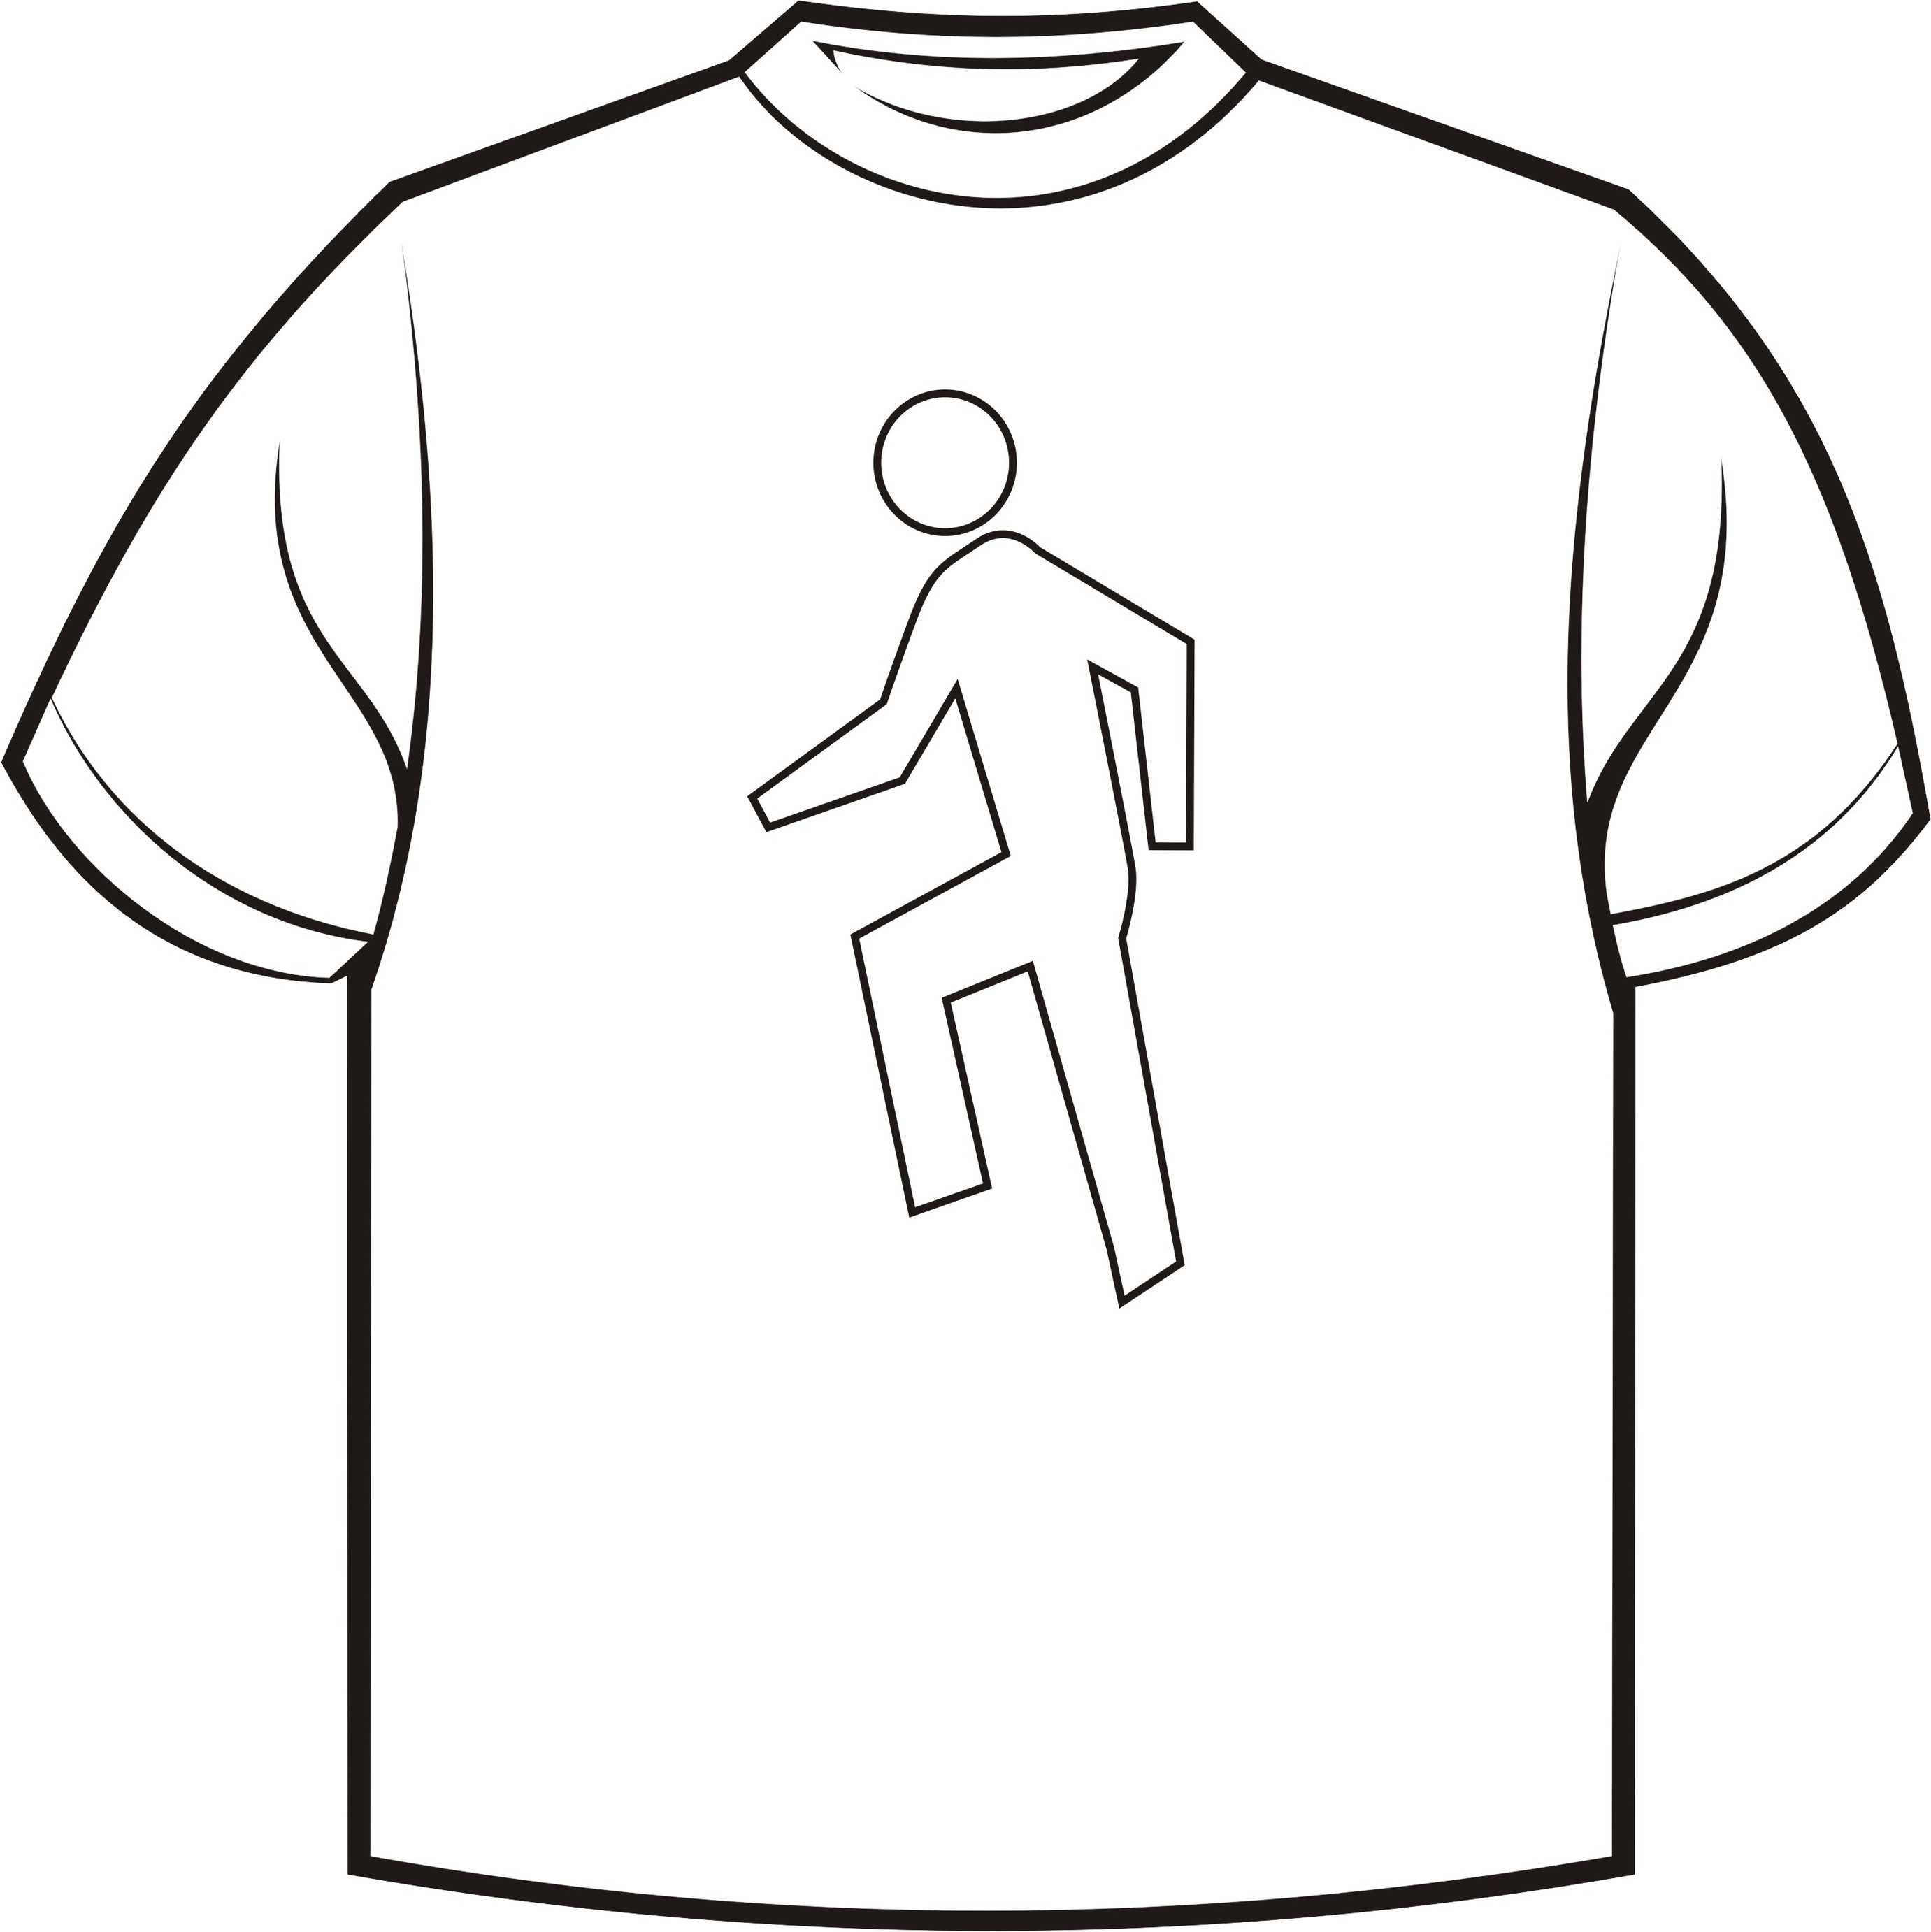 Blank Human Body Outline Clipart - Free to use Clip Art Resource